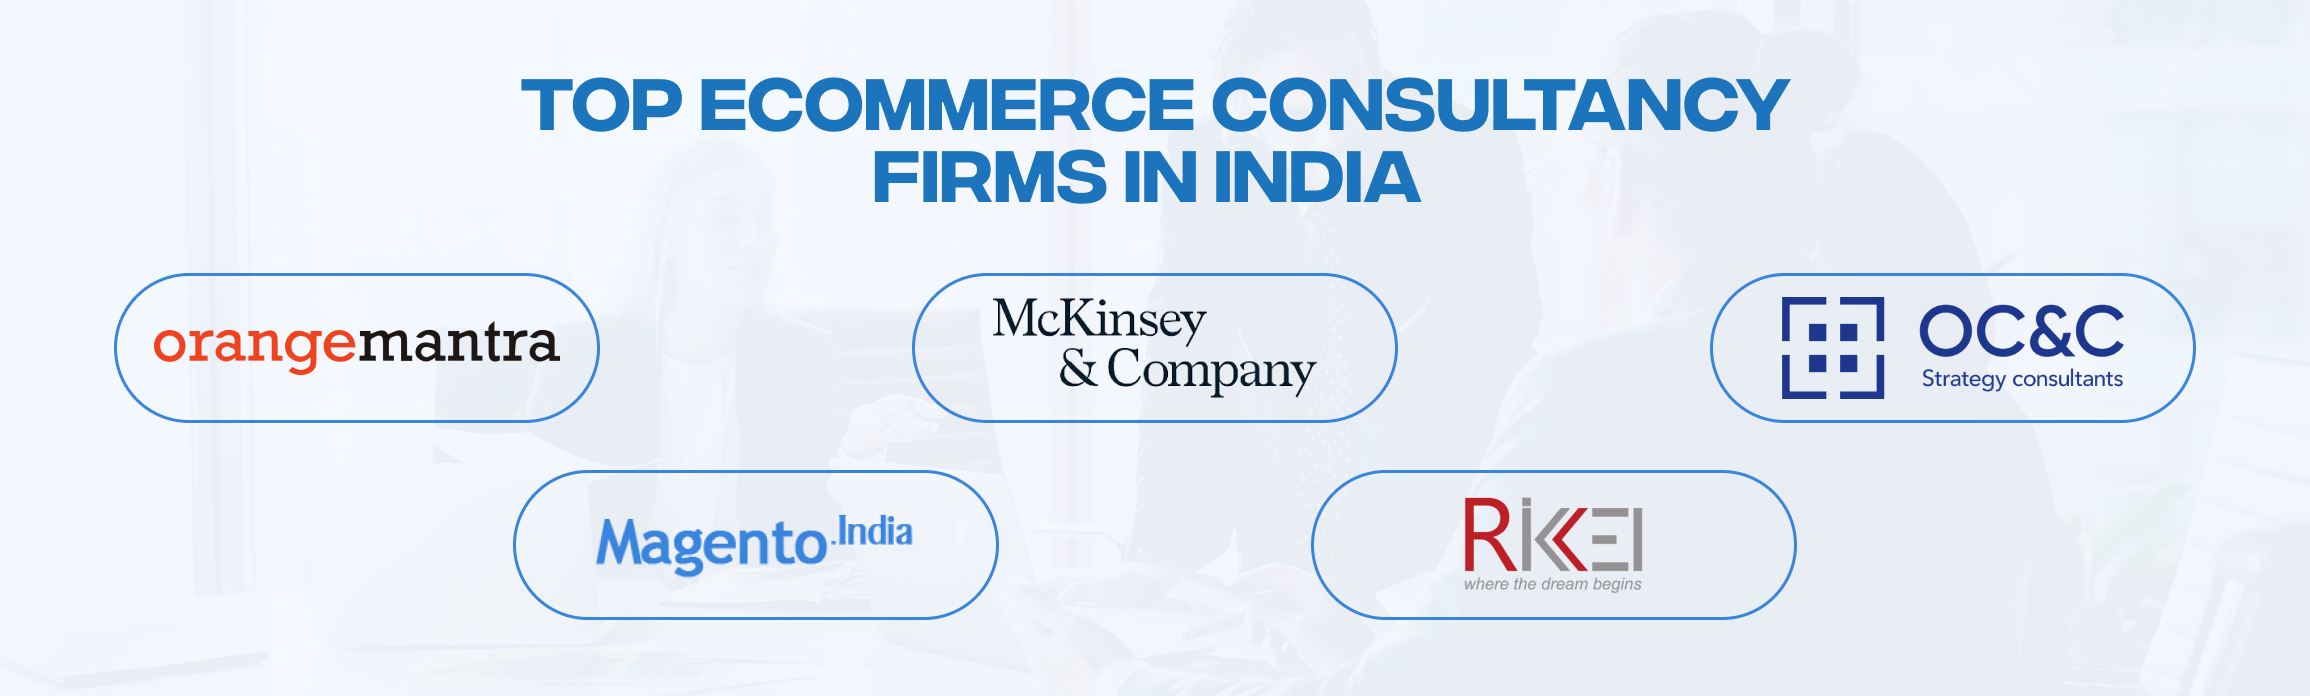 Top eCommerce Consultancy Firms in India